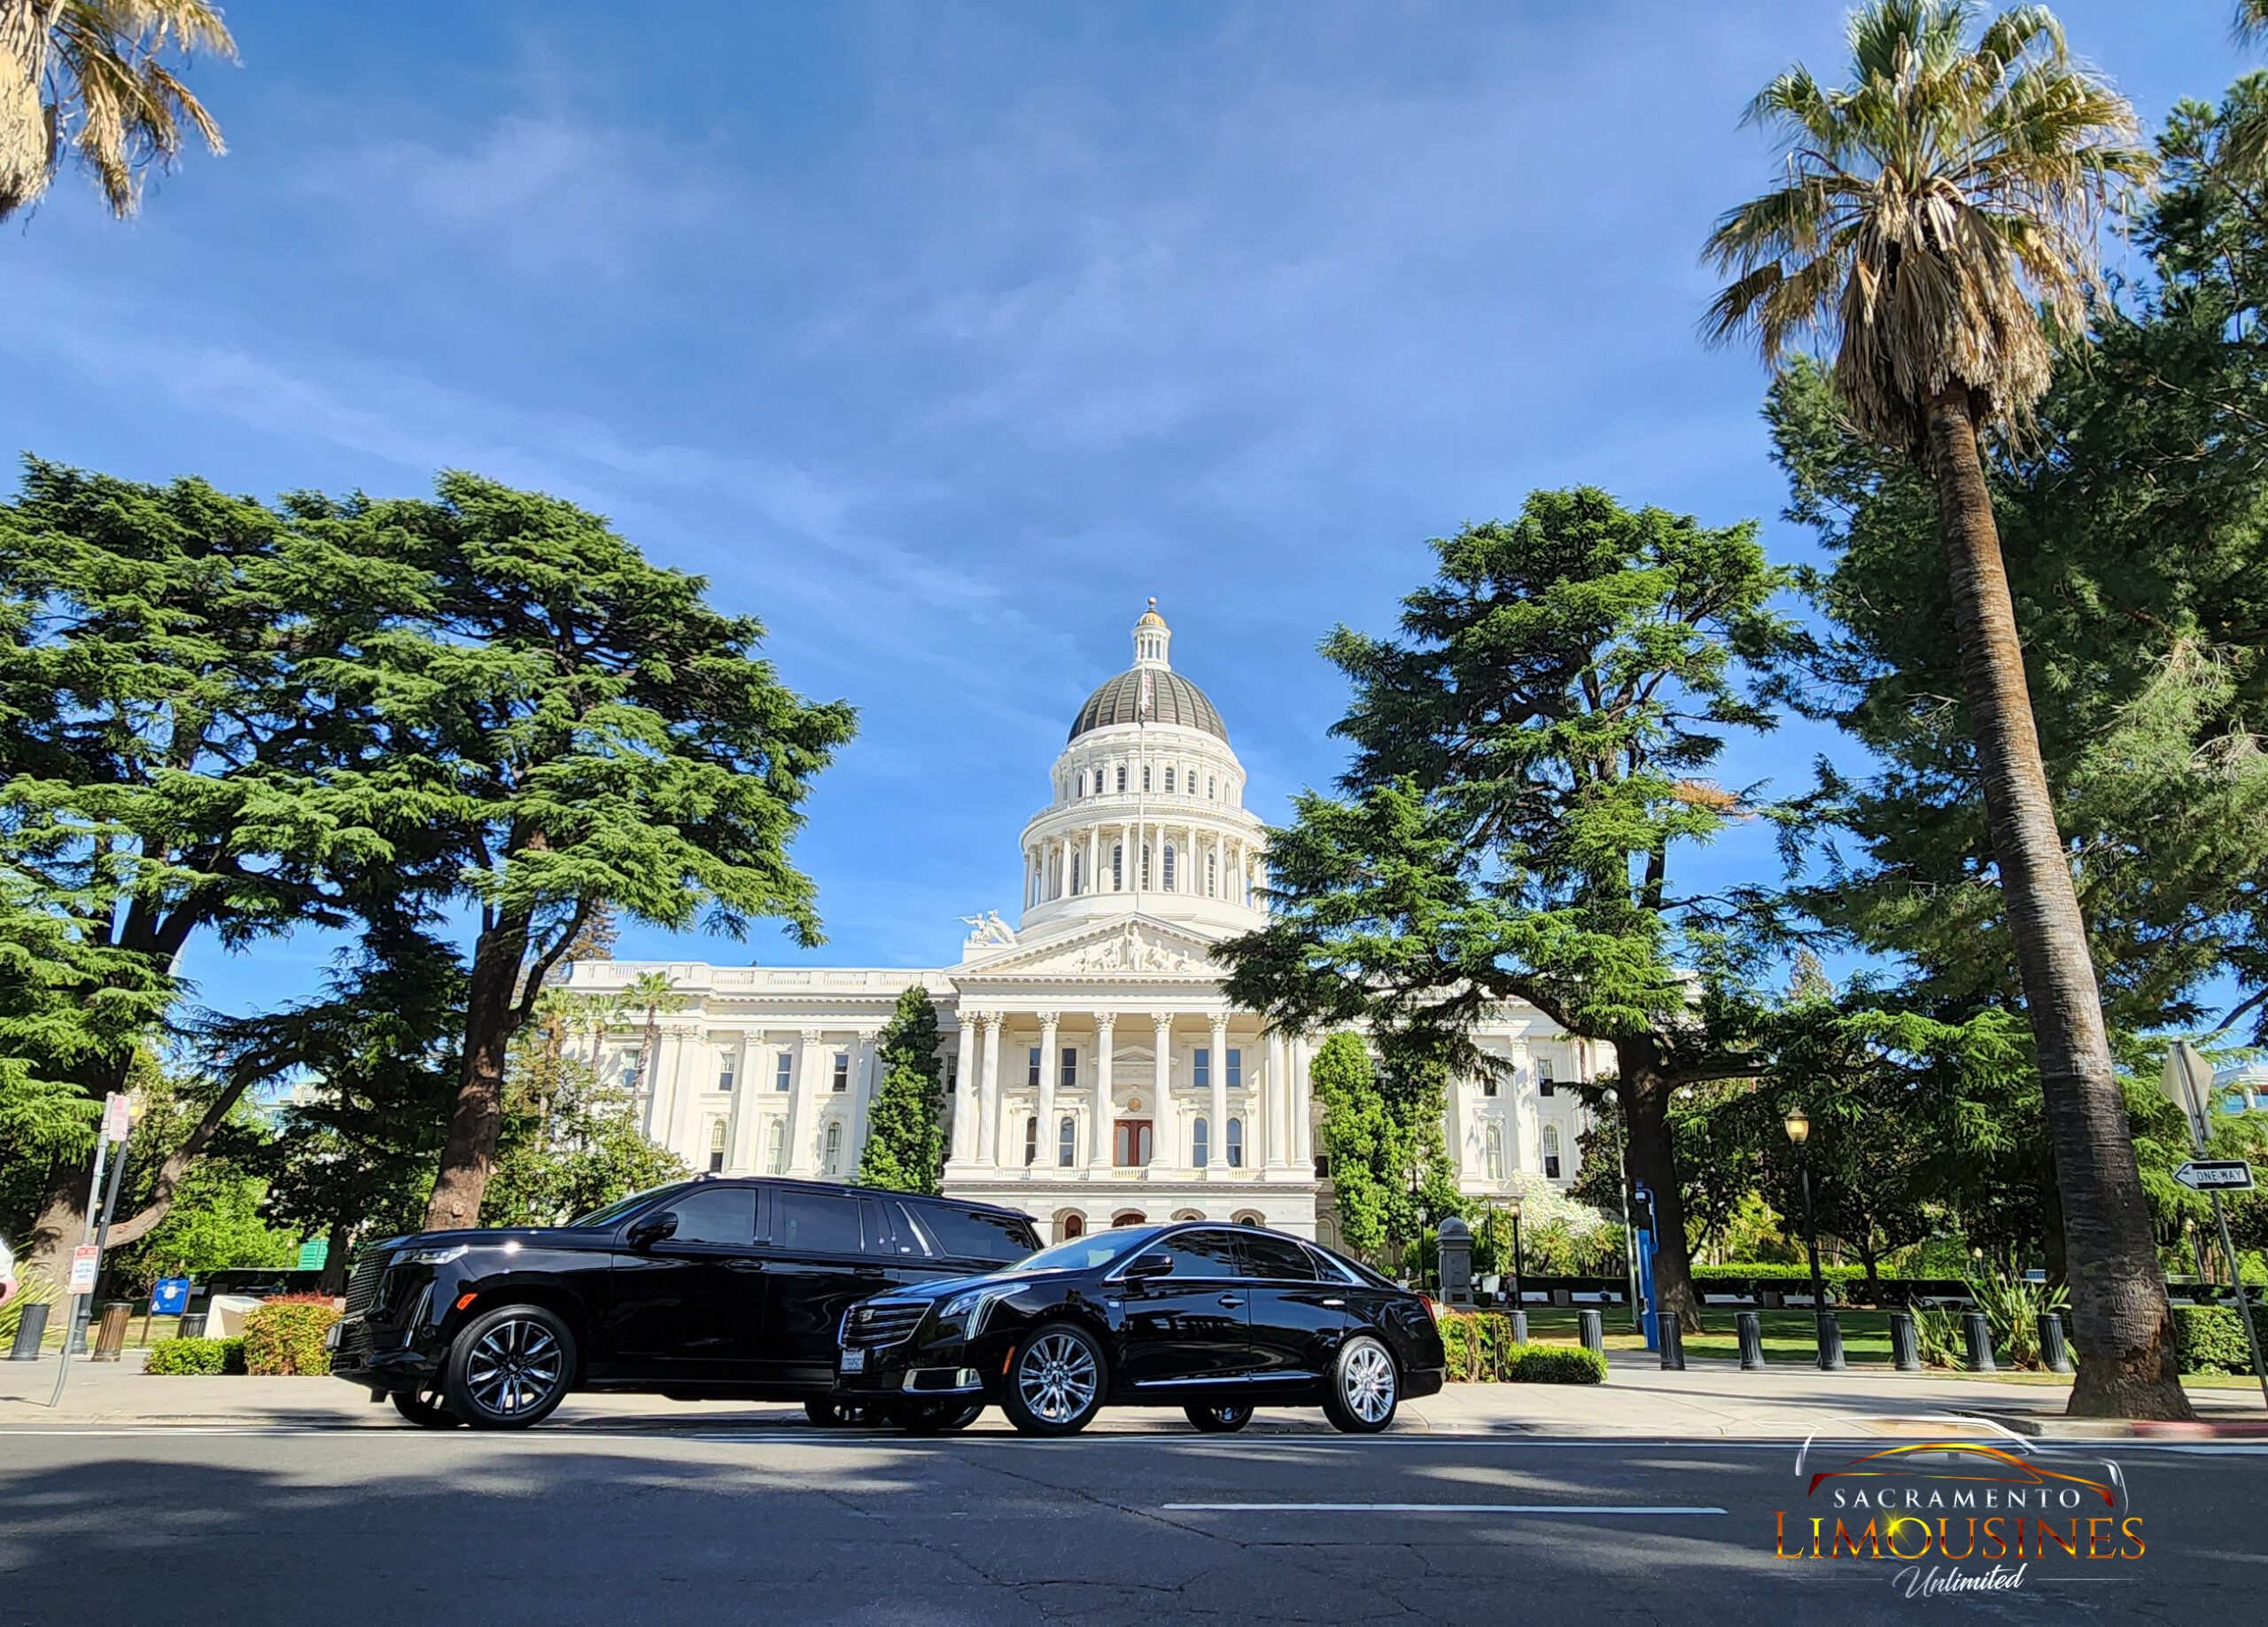 Group_SUV_Escalade_Sedan_Xtsl_Downtown_Capitol_outfront_Centered-scaled